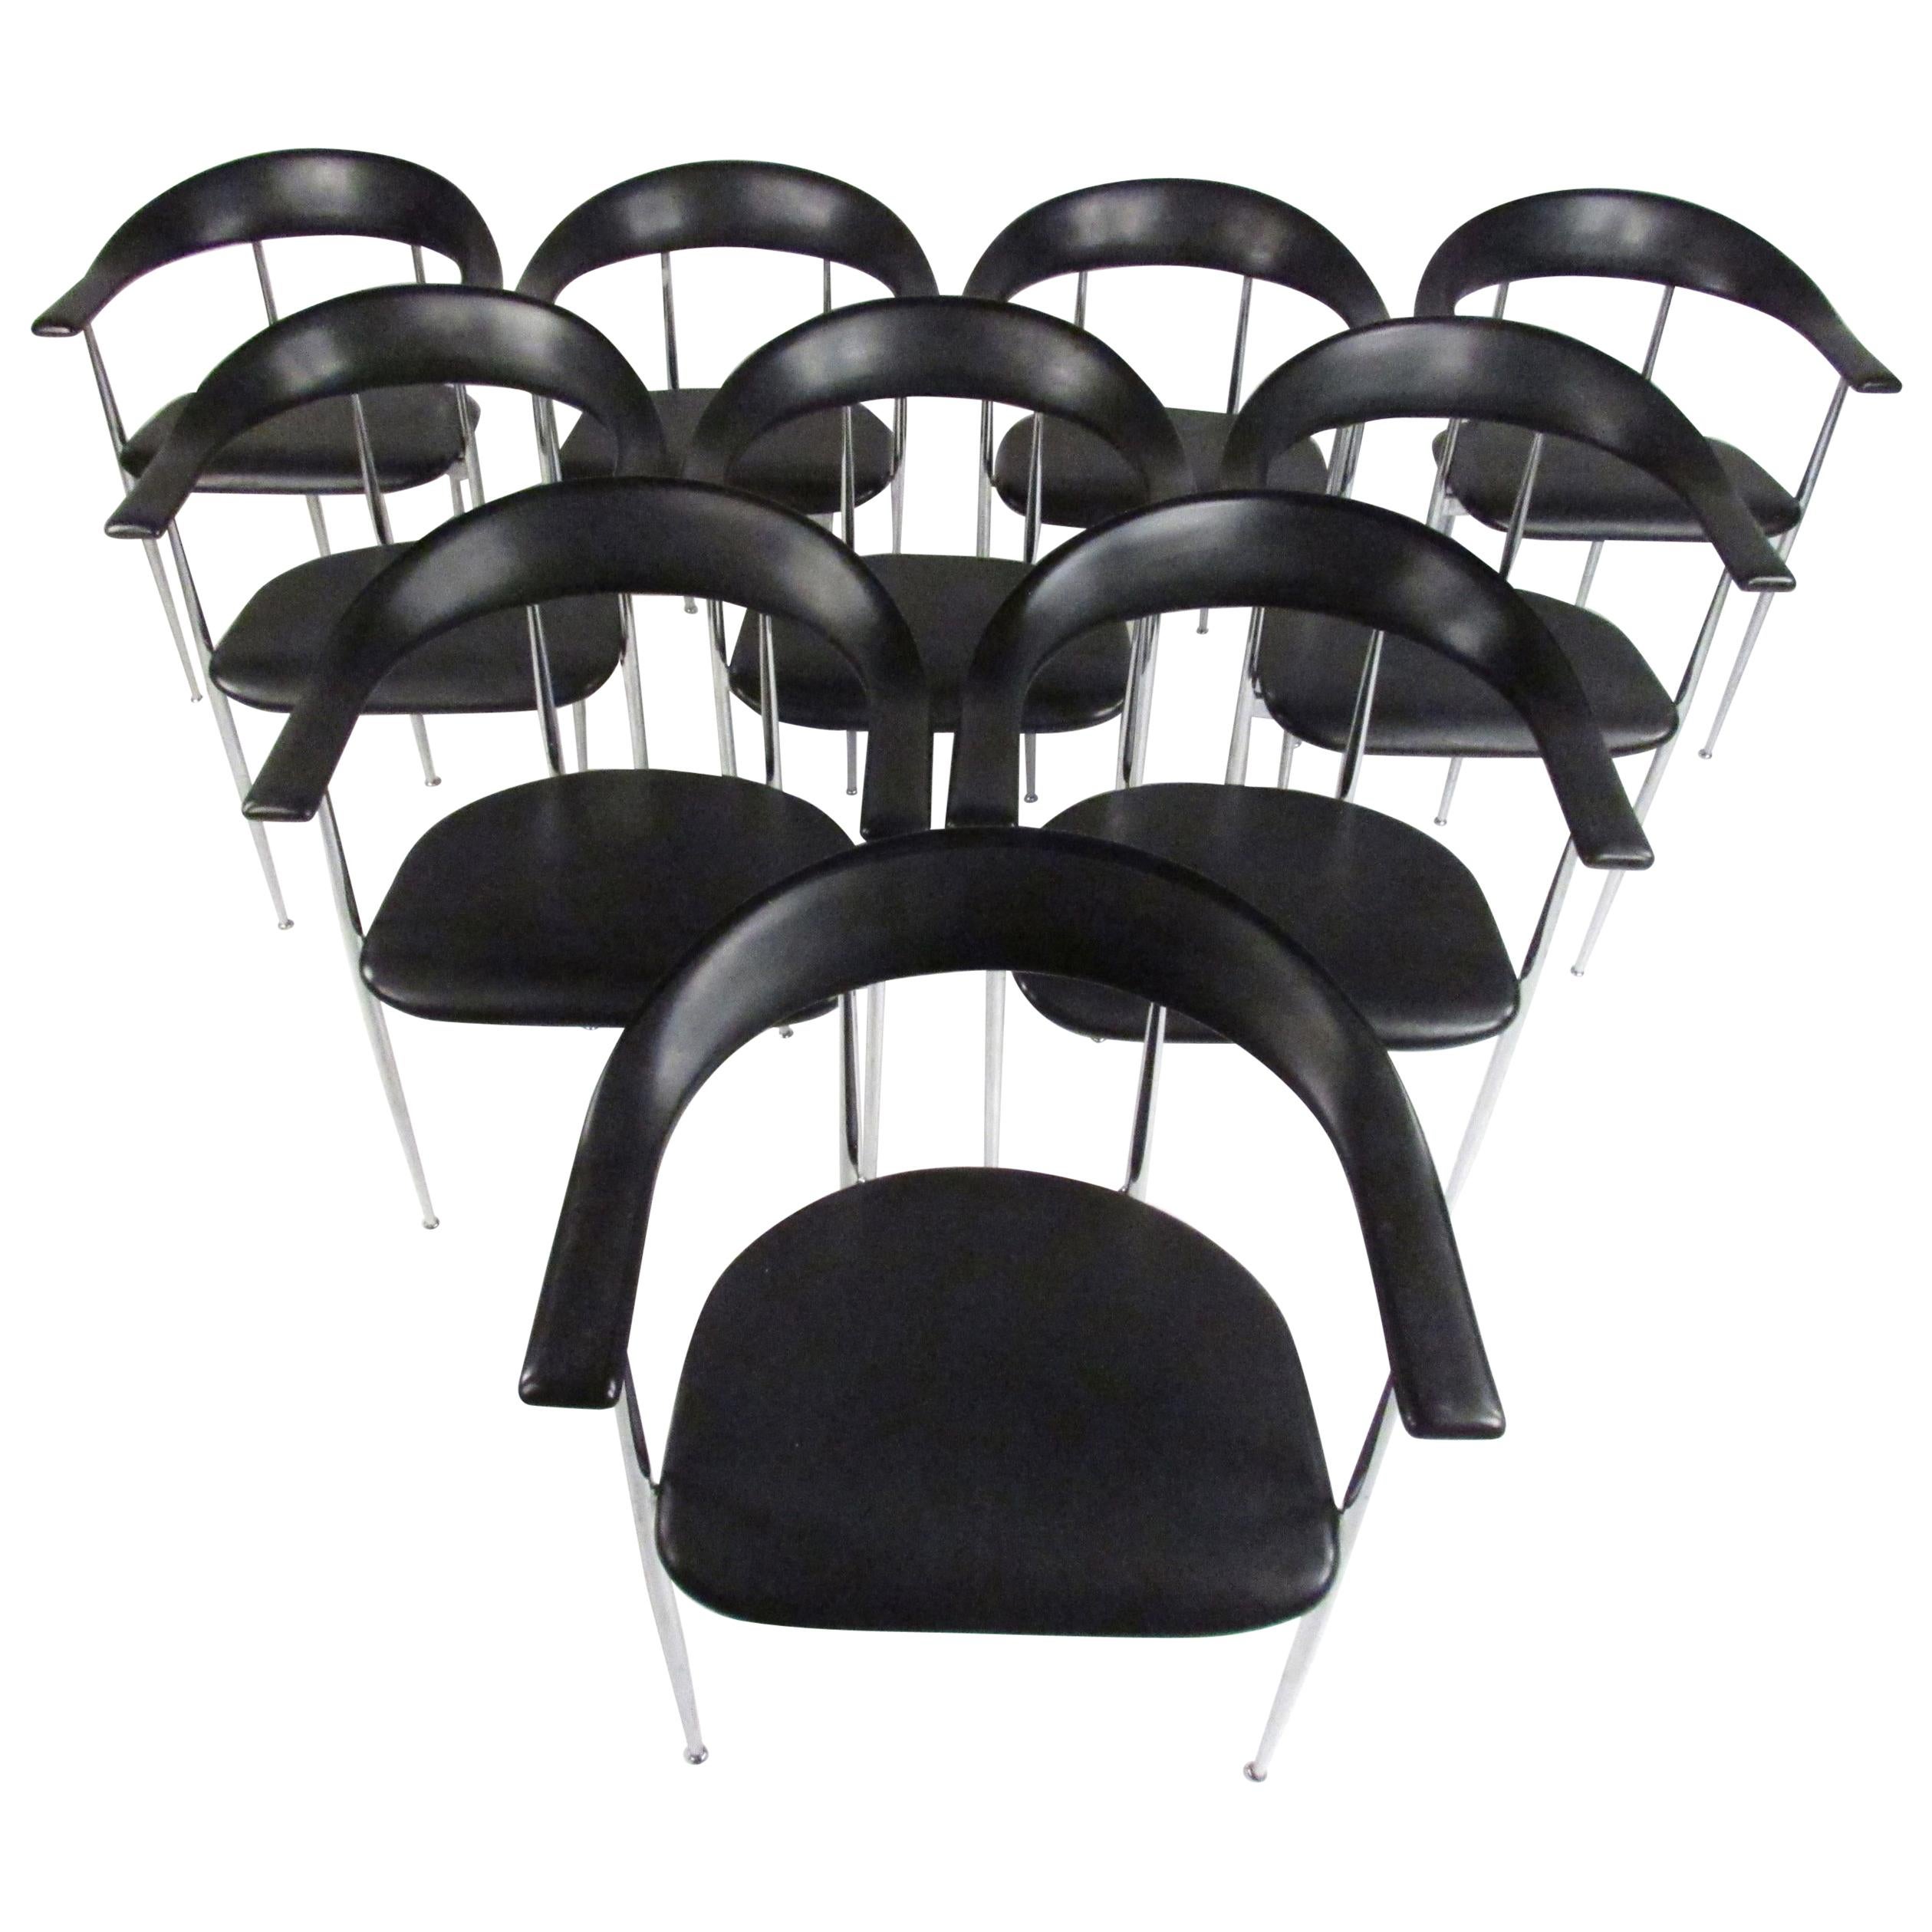 Set of Twelve P70 Chairs by Giancarlo Vegni for Fasem Italy